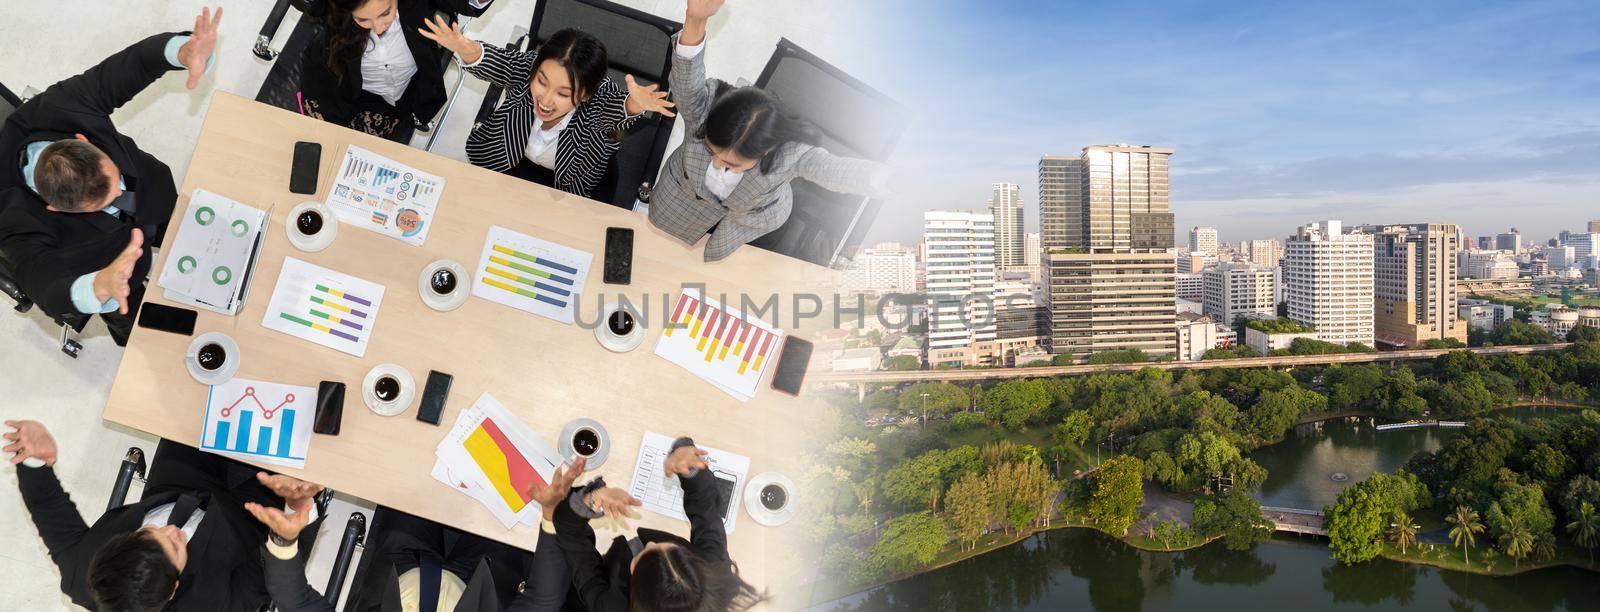 Successful business people celebrate together with joy at office table shot from top view . Young businessman and businesswoman workers express cheerful victory showing teamwork in broaden view .